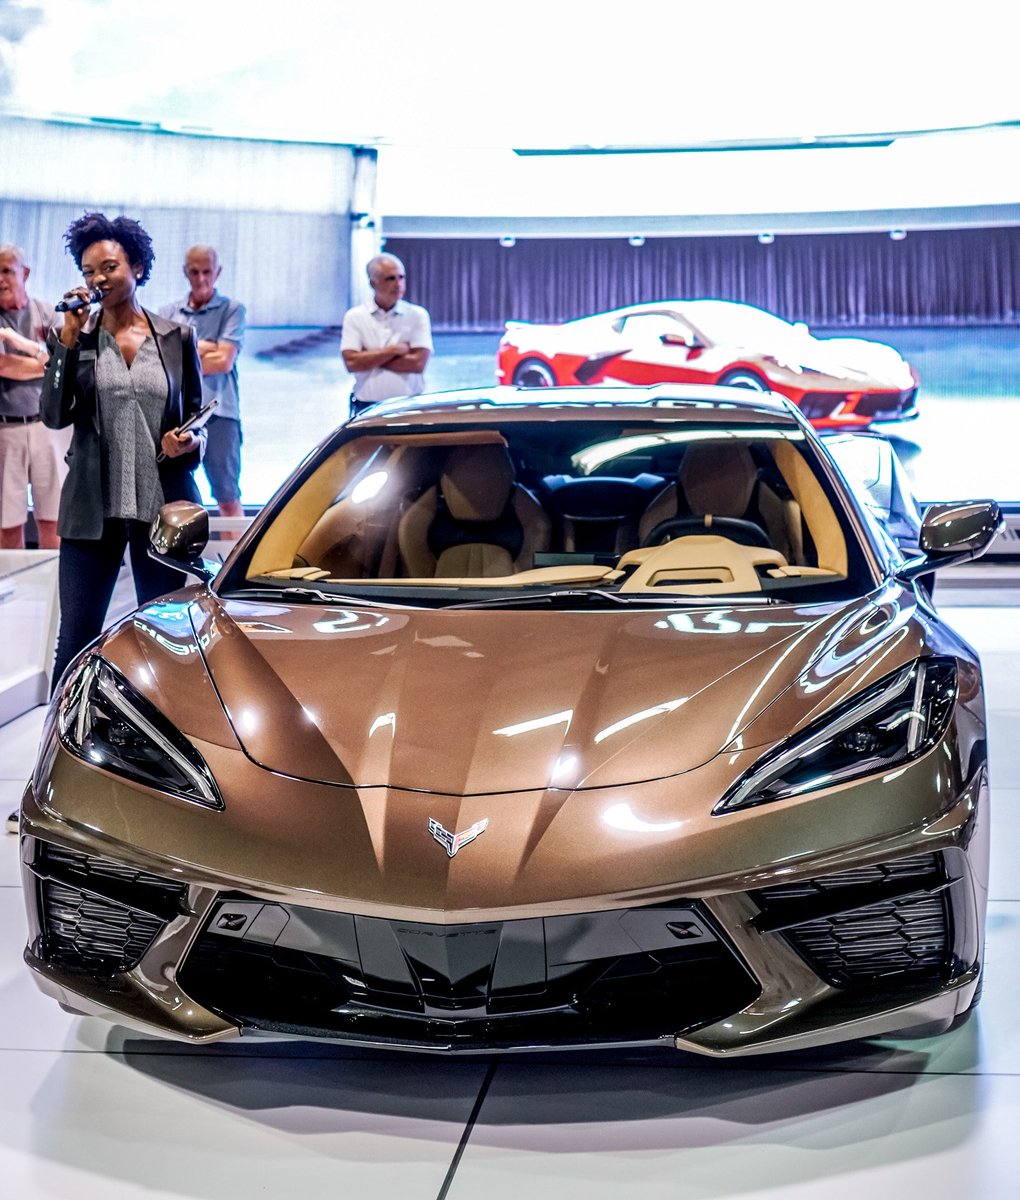 Day 4 is underway! Today is your last chance to get an up-close look at the all-new 2020 #CorvetteStingray! Get your tickets here: bit.ly/2MYC2Gj